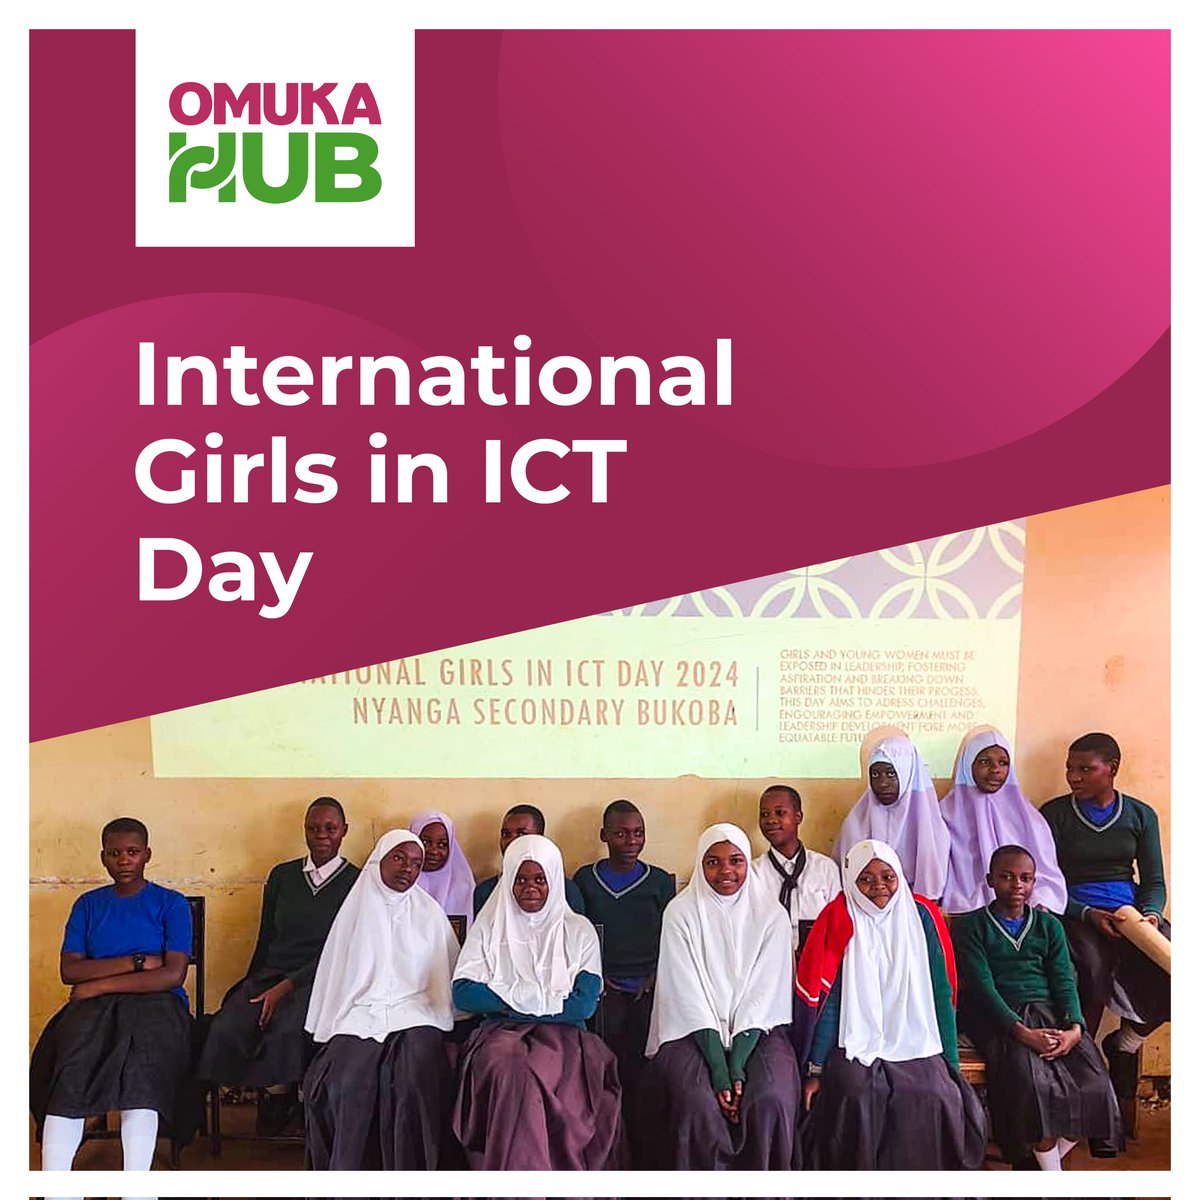 Happy International Girls in ICT day. We have celebrated this day by providing digital skills to secondary school girls in Nyanga #Bukoba. We will continue to encourage girls to get involved in ICT so that we can achieve the goal of inclusion. #GirlsICTday #DigitalInclusion